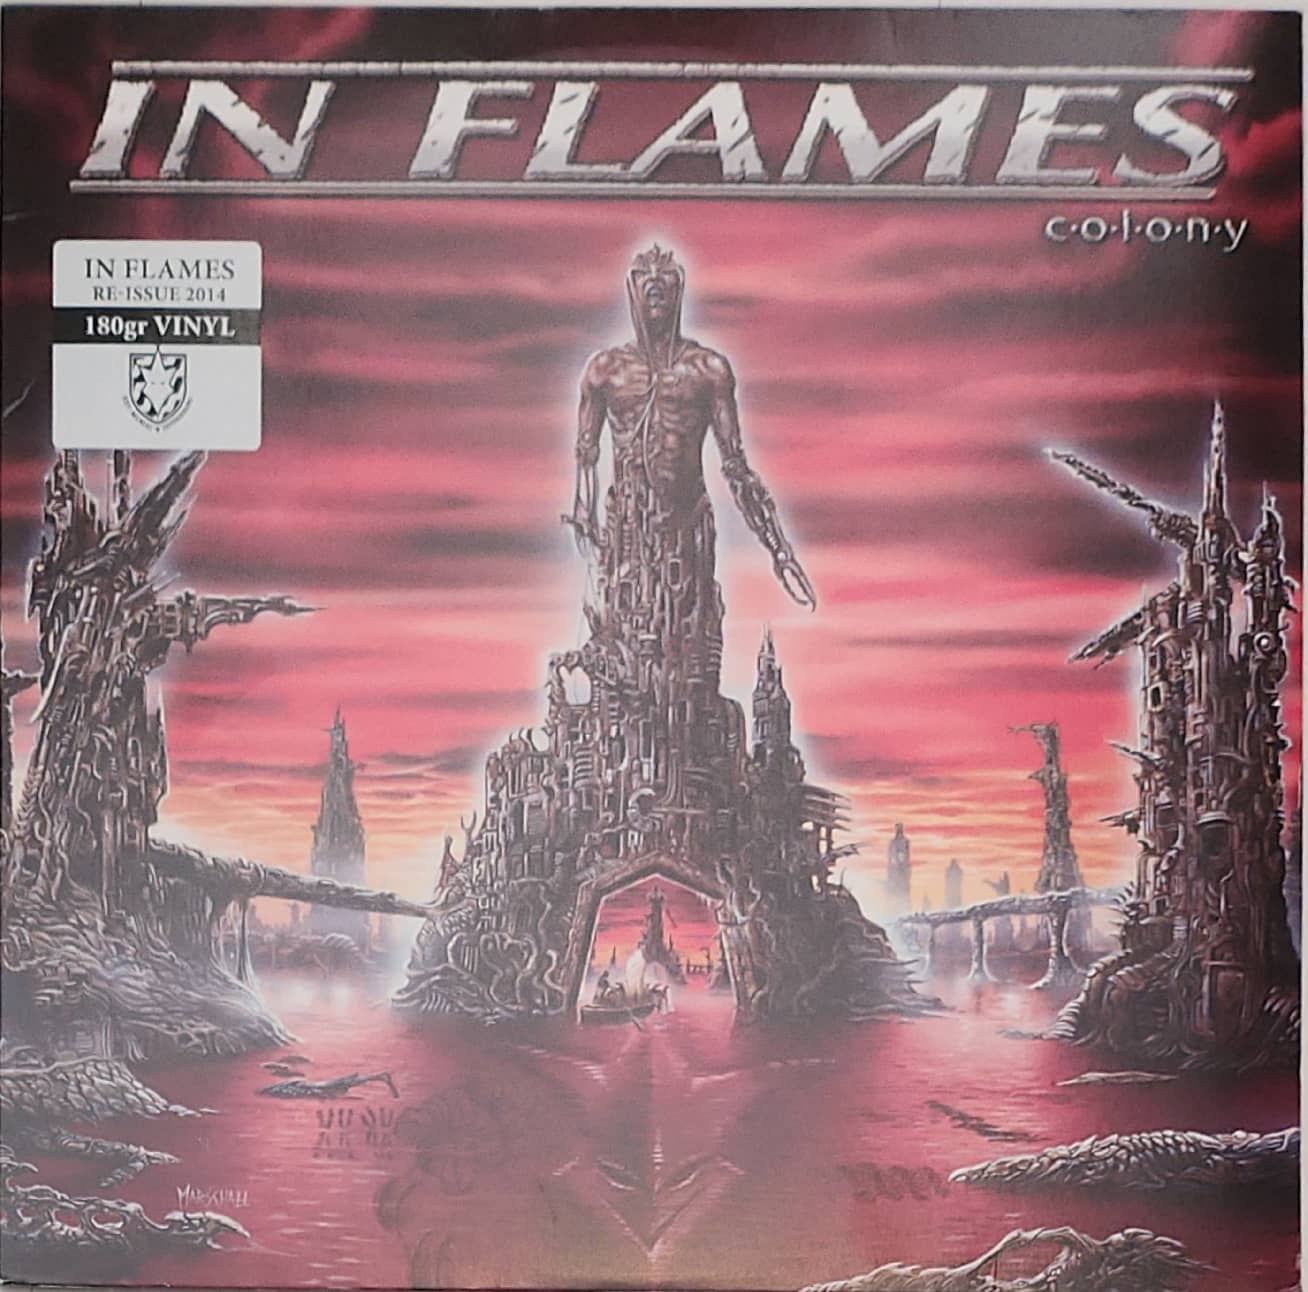 Pre Loved Record - In Flames - Colony